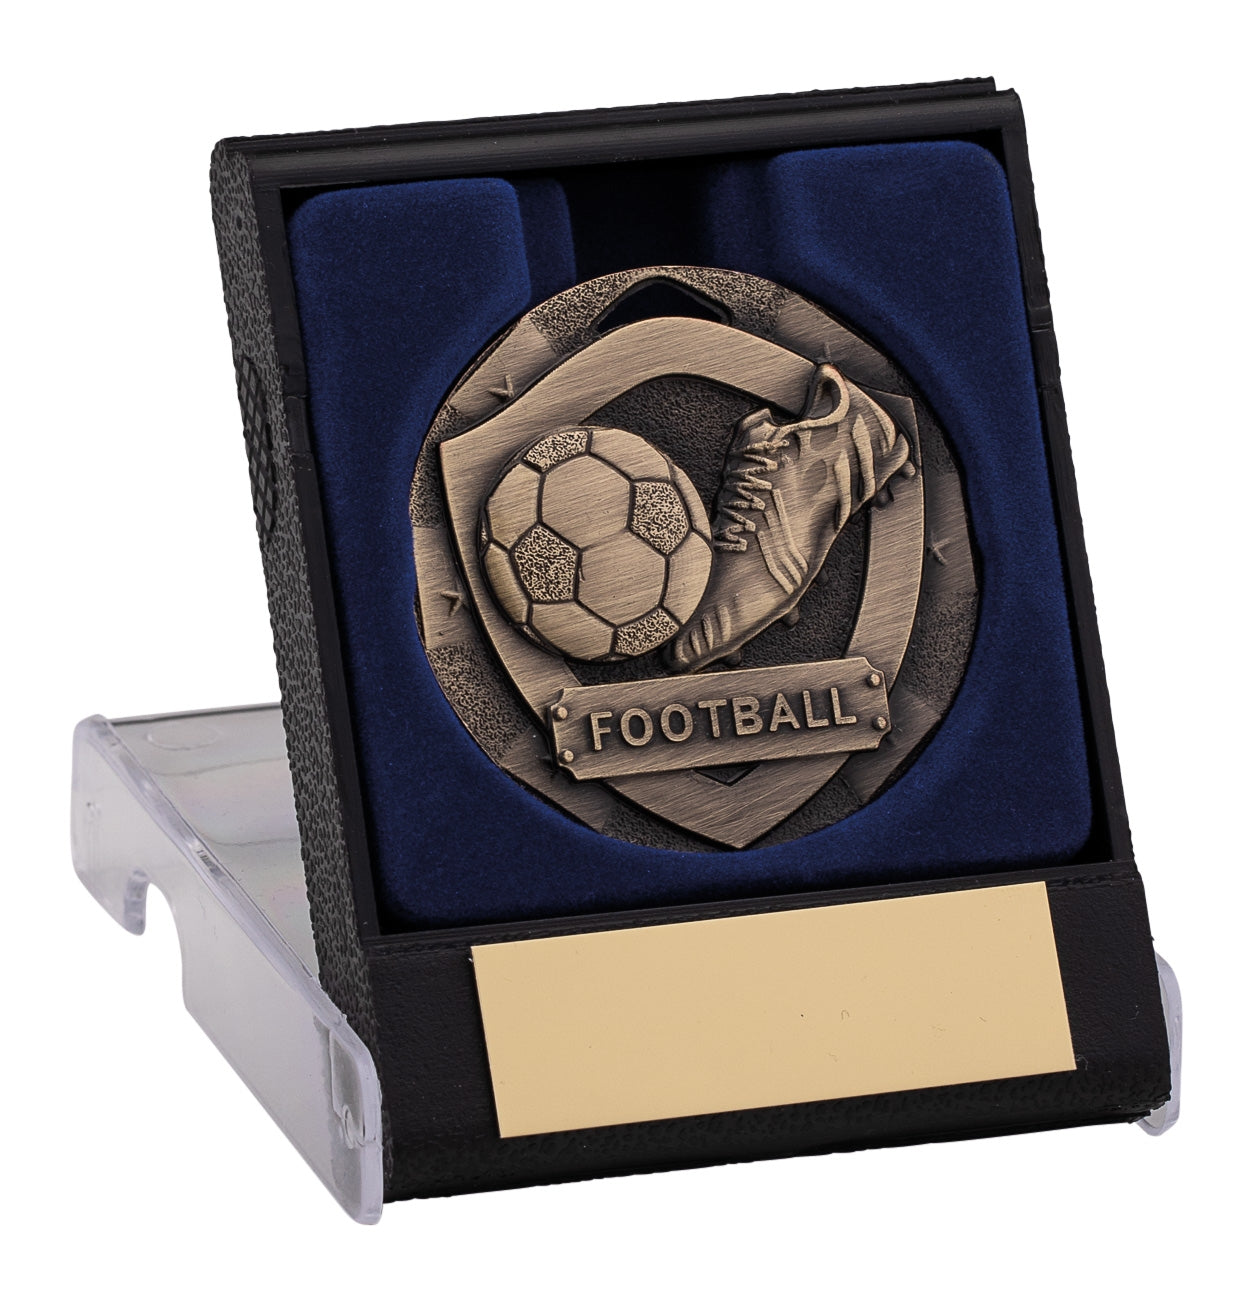 50mm Bronze Football Boot and Ball Medal in Plastic Flip Box